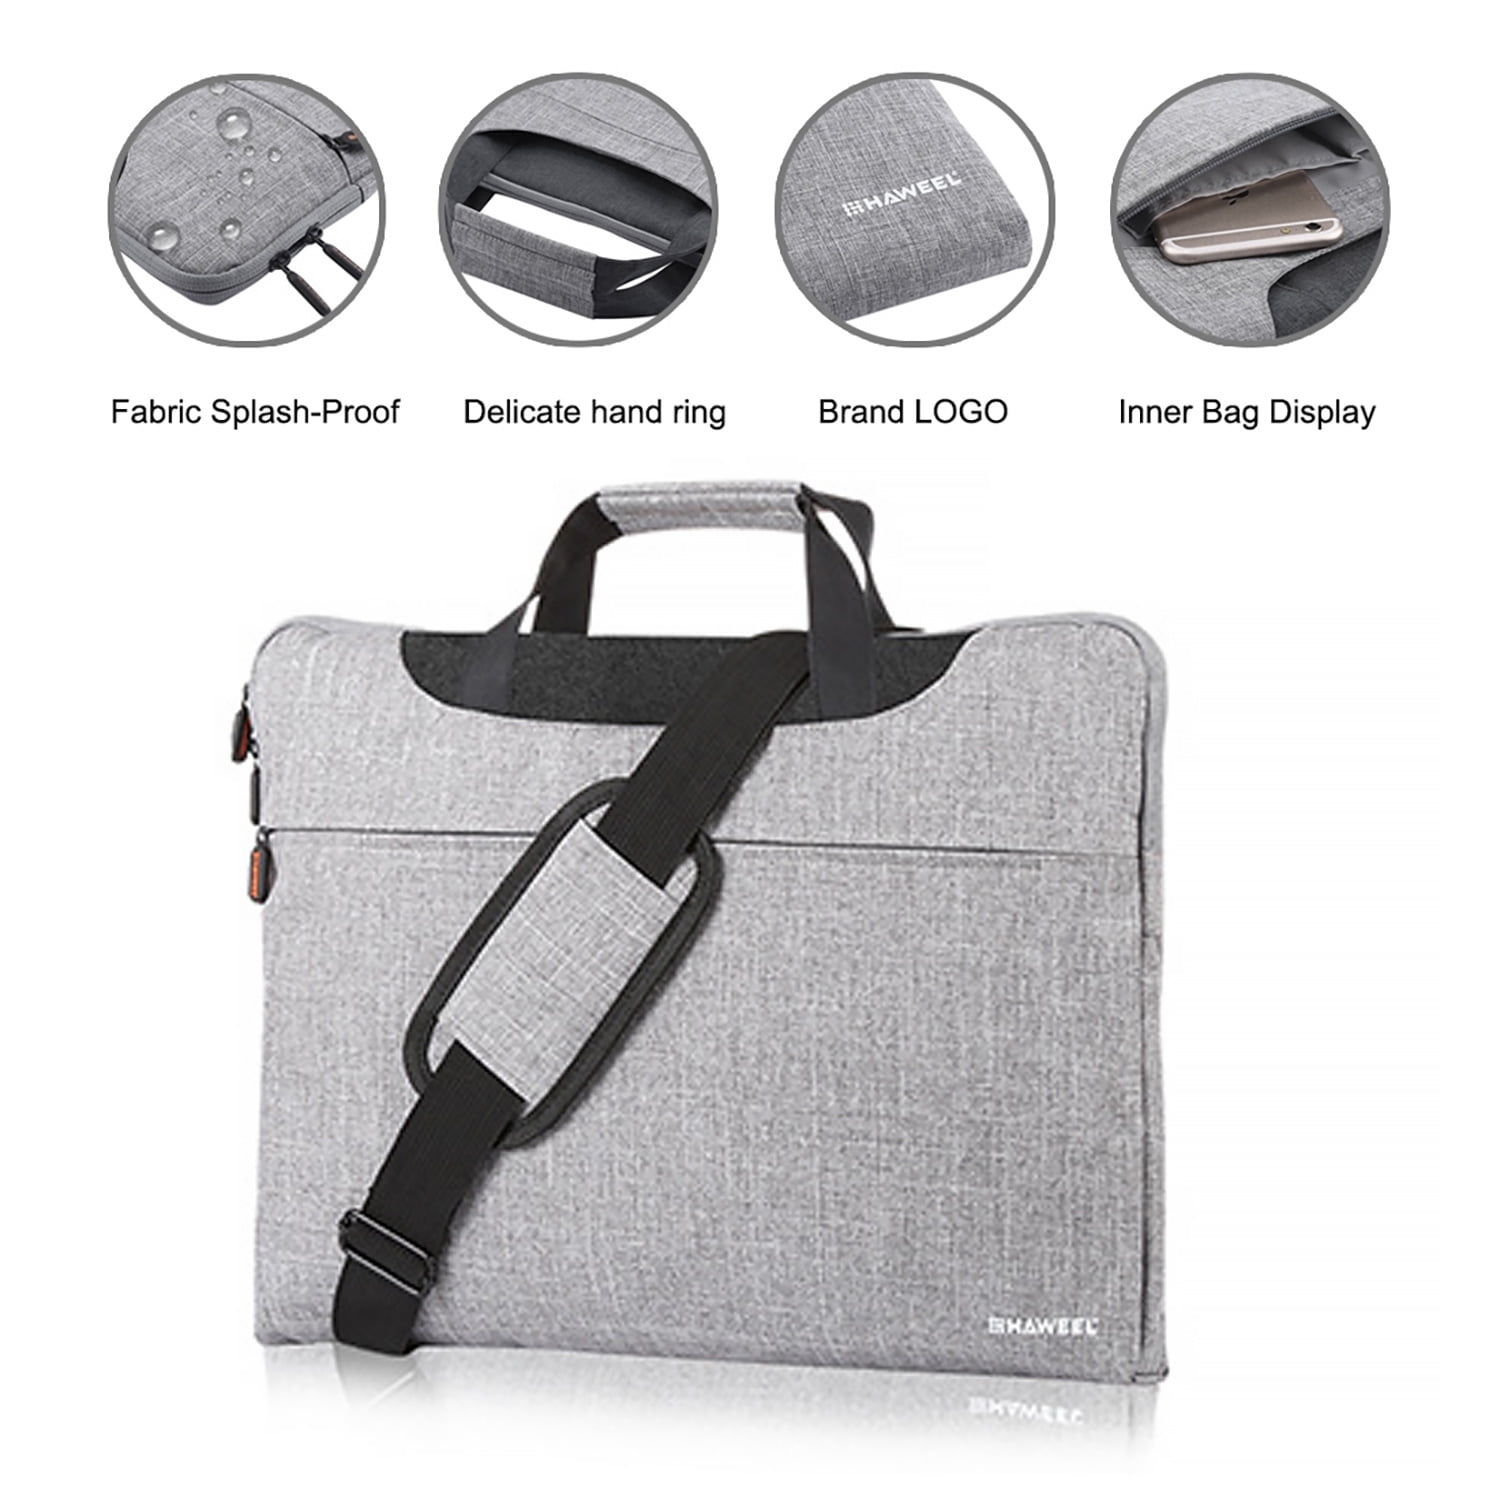 School Laptop Shoulder Bag Compatible 13-15.6 Inches Office or Business Travel for Outdoor Ultra-Thin Laptop Bag Cake Dessert Laptop Handbag with Handles